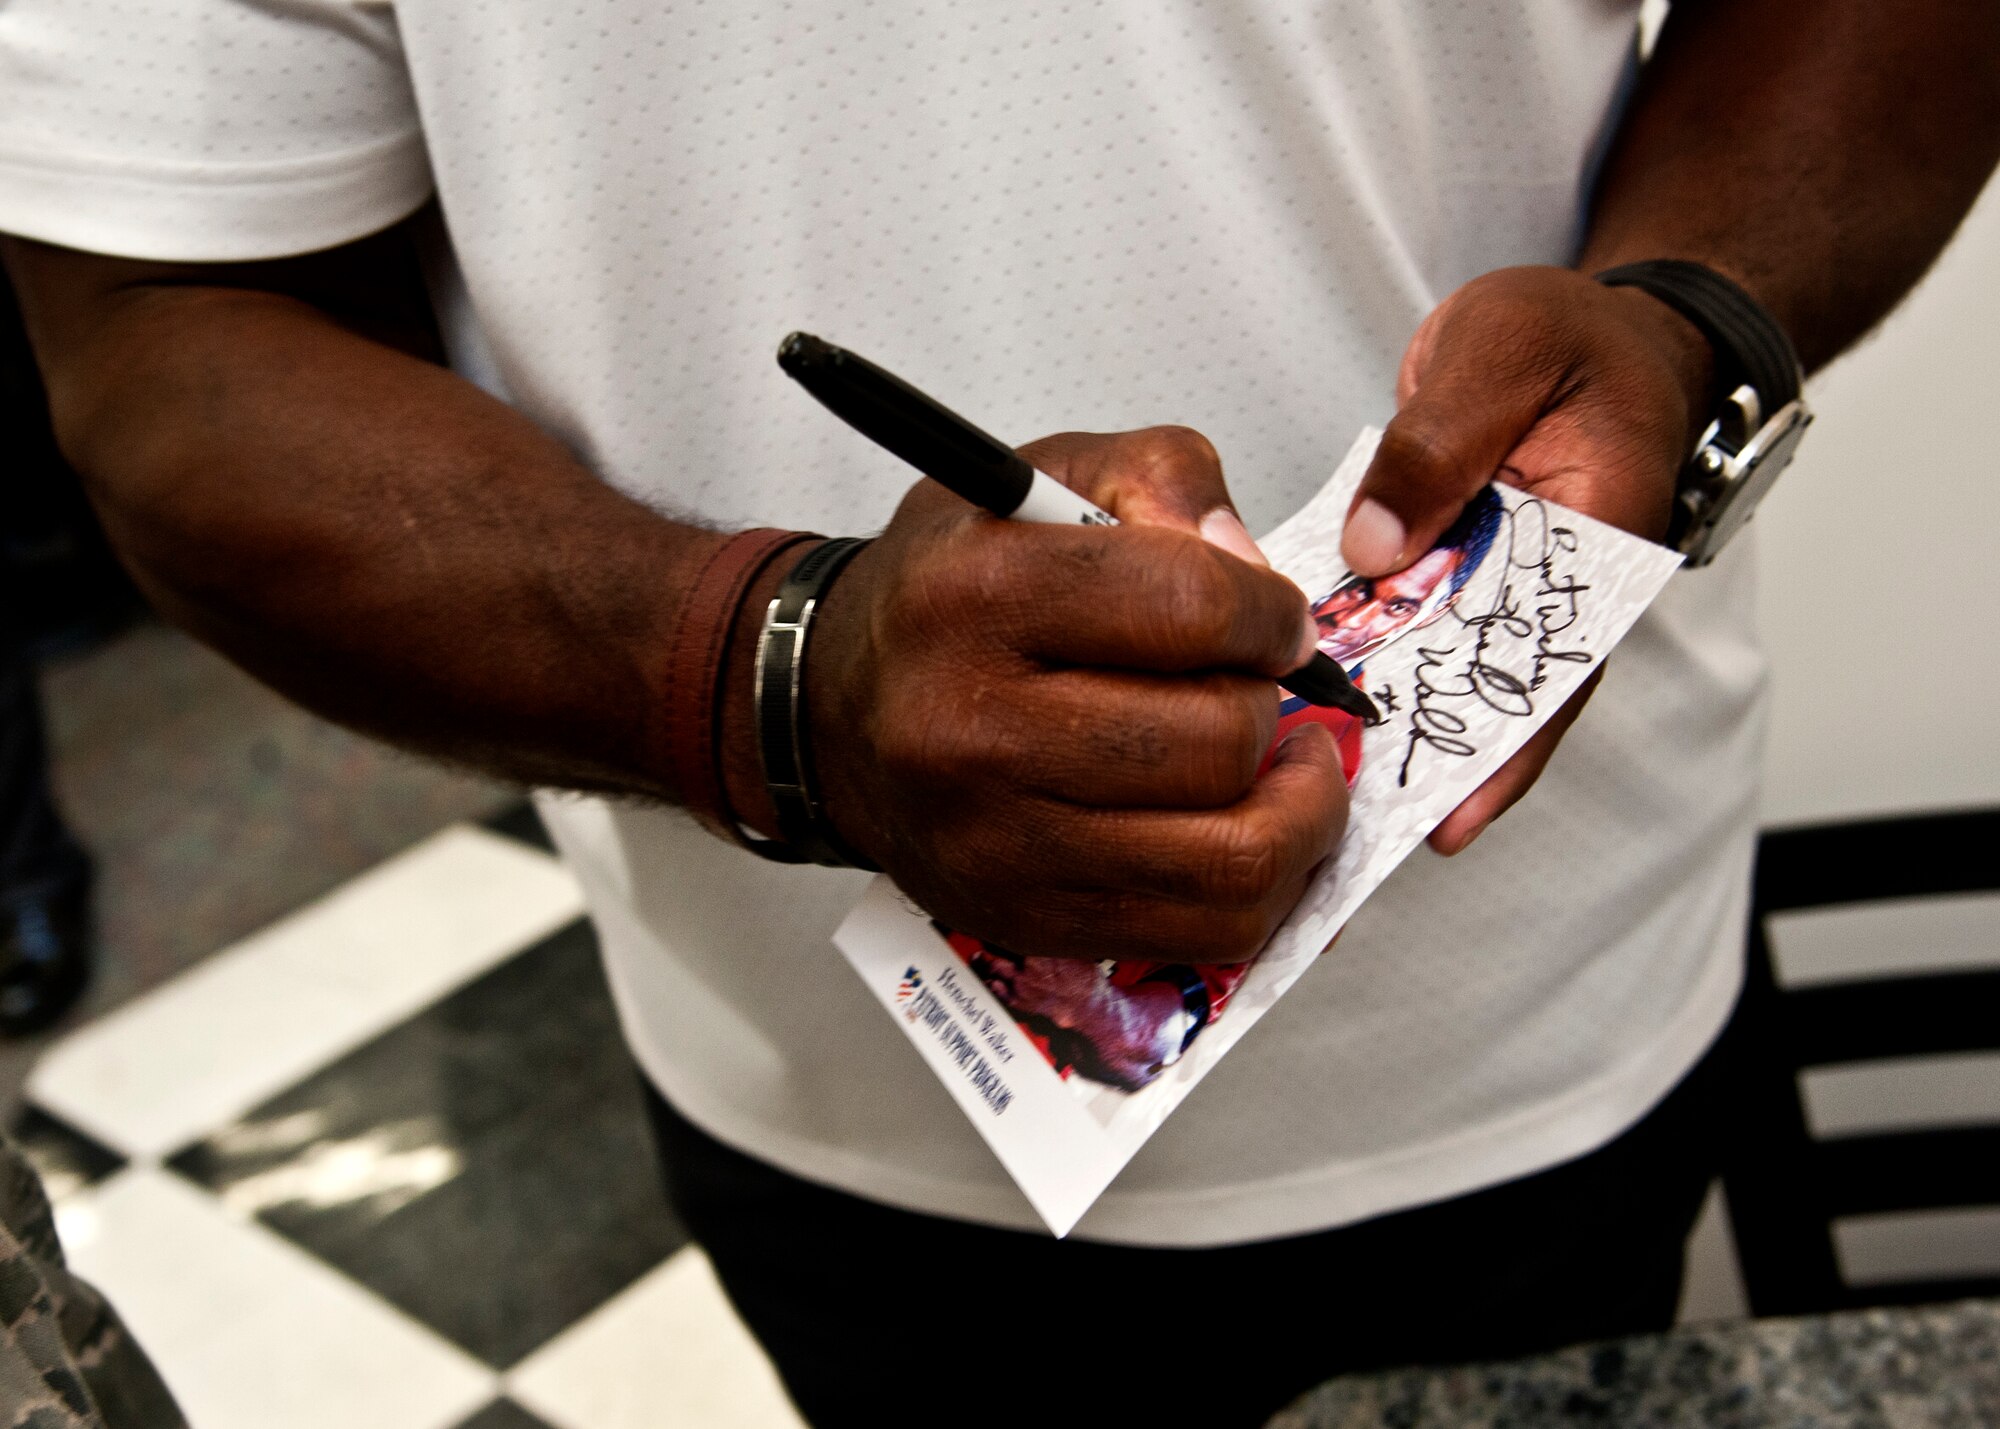 Herschel Walker signs an autograph after a breakfast May 21, 2014, at Whiteman Air Force Base, Missouri. Walker was inducted into the College Football Hall of Fame in 1999. (U.S. Air Force photo by Senior Airman Daniel Phelps/Released)